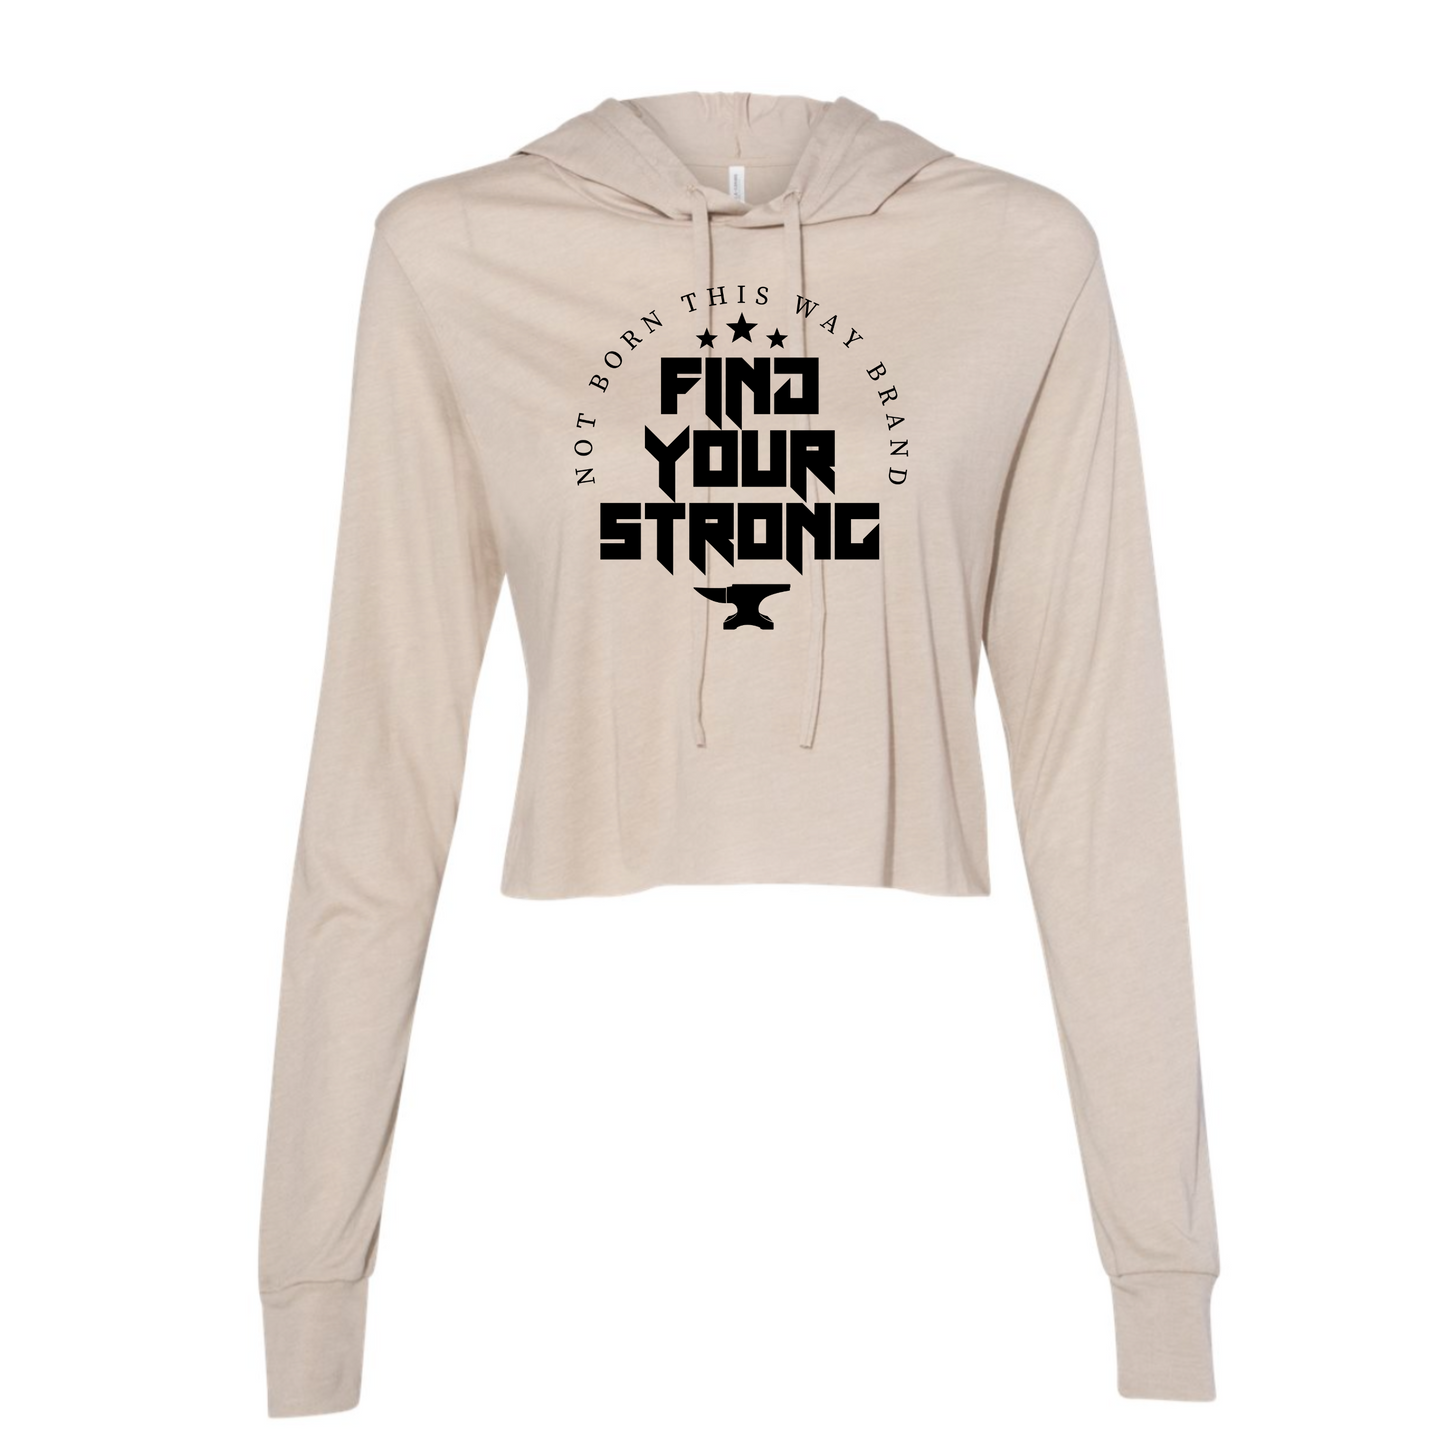 FIND YOUR STRONG- Cropped longsleeve lightweight pullover hoodie